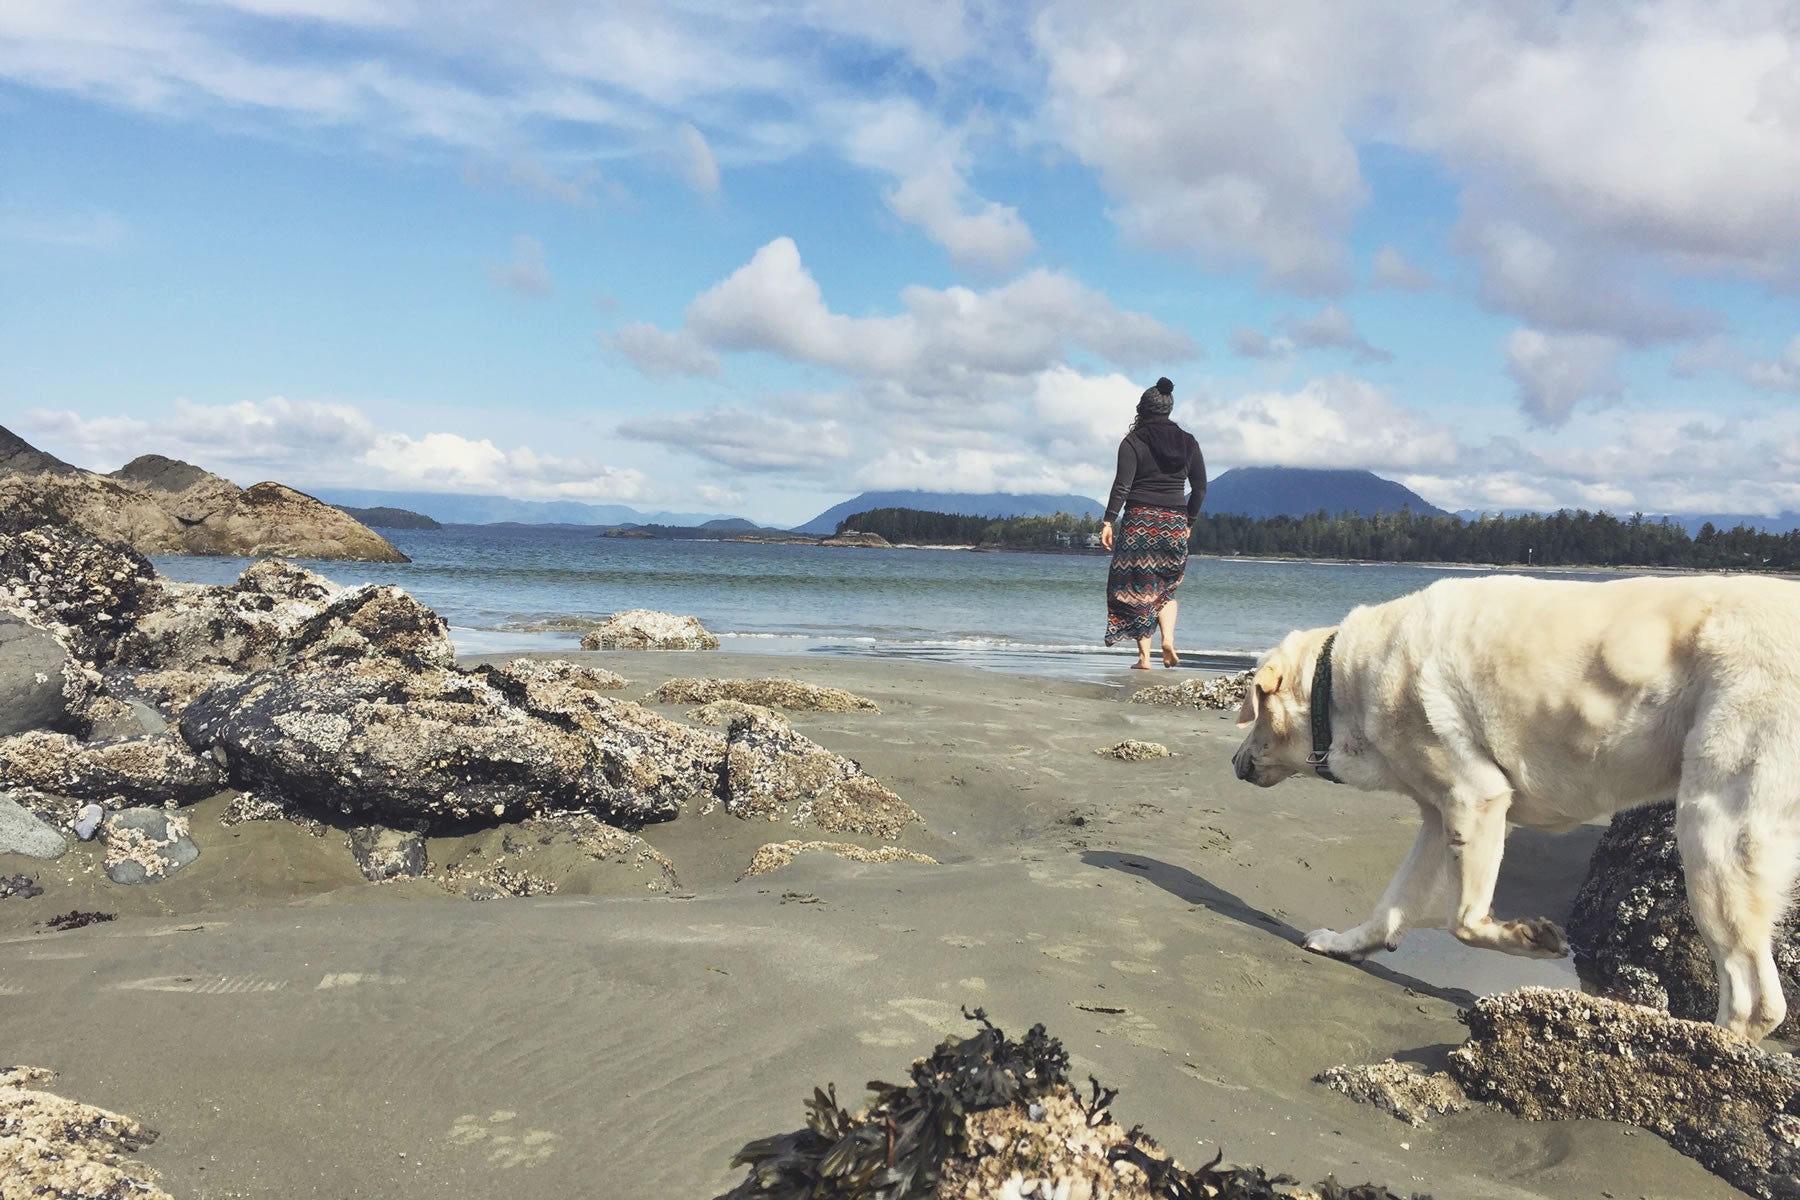 Baylor and Mallory explore tide pools on the beach.